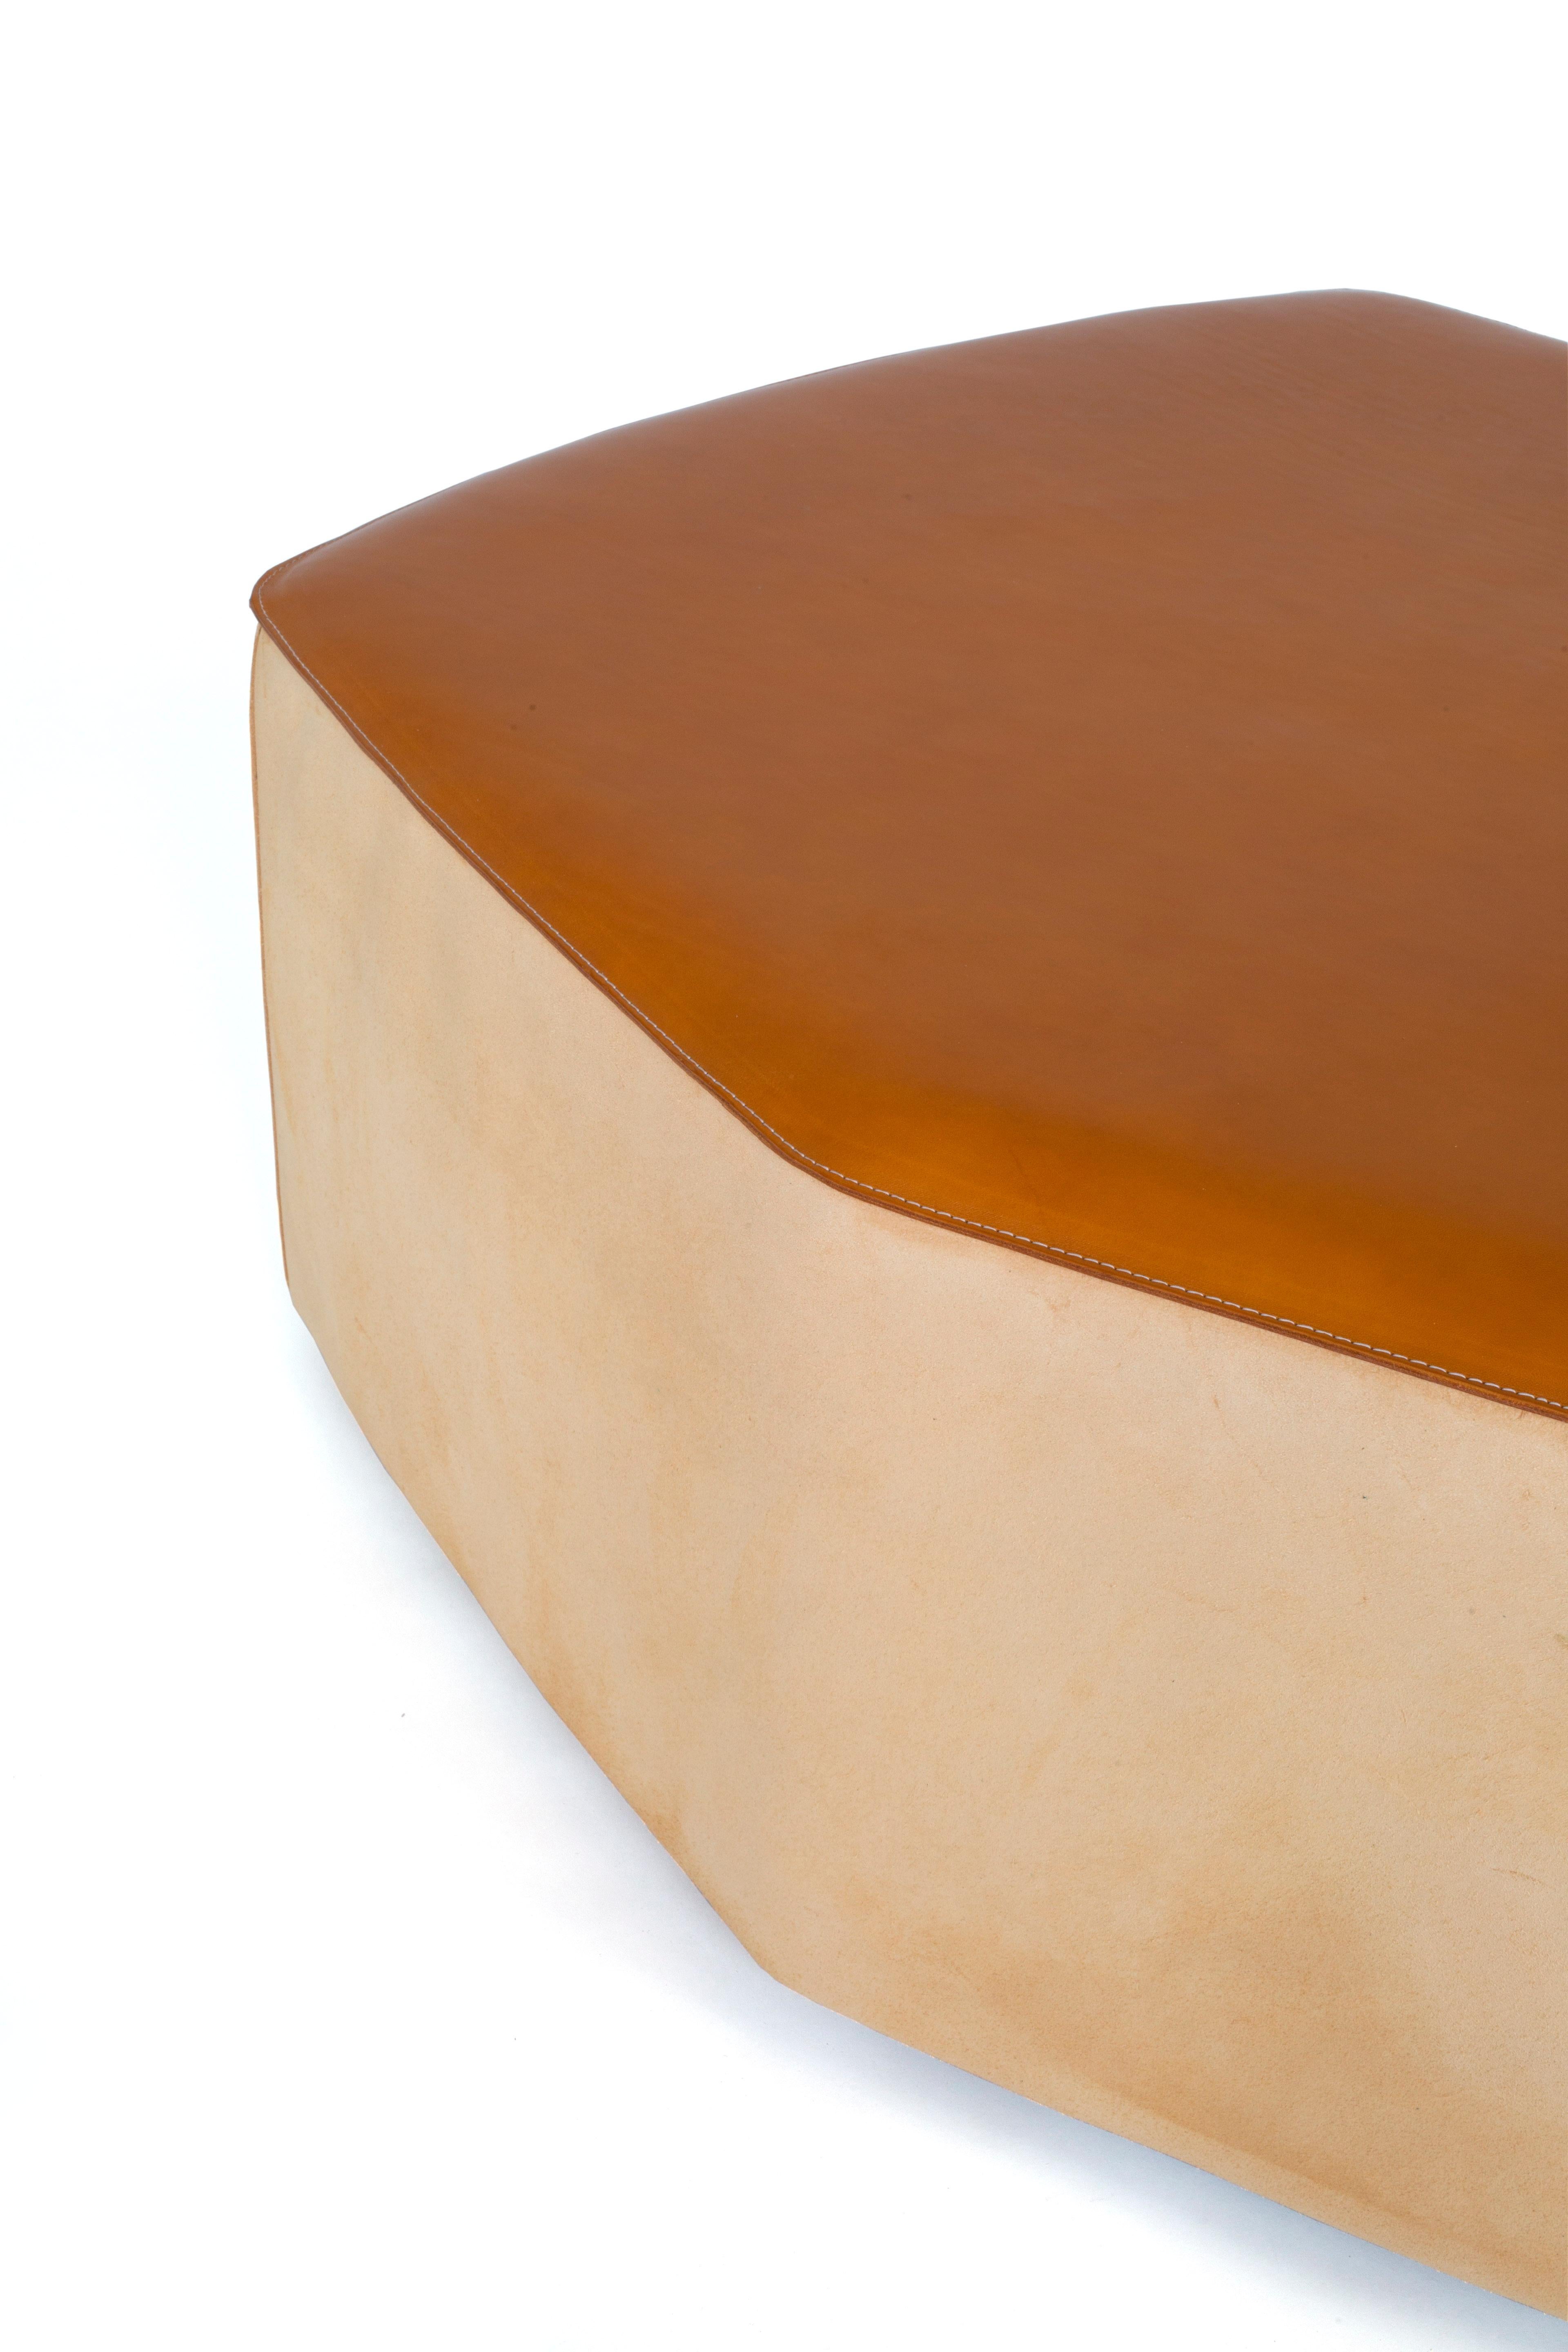 Leather Stools by Nestor Perkal 8